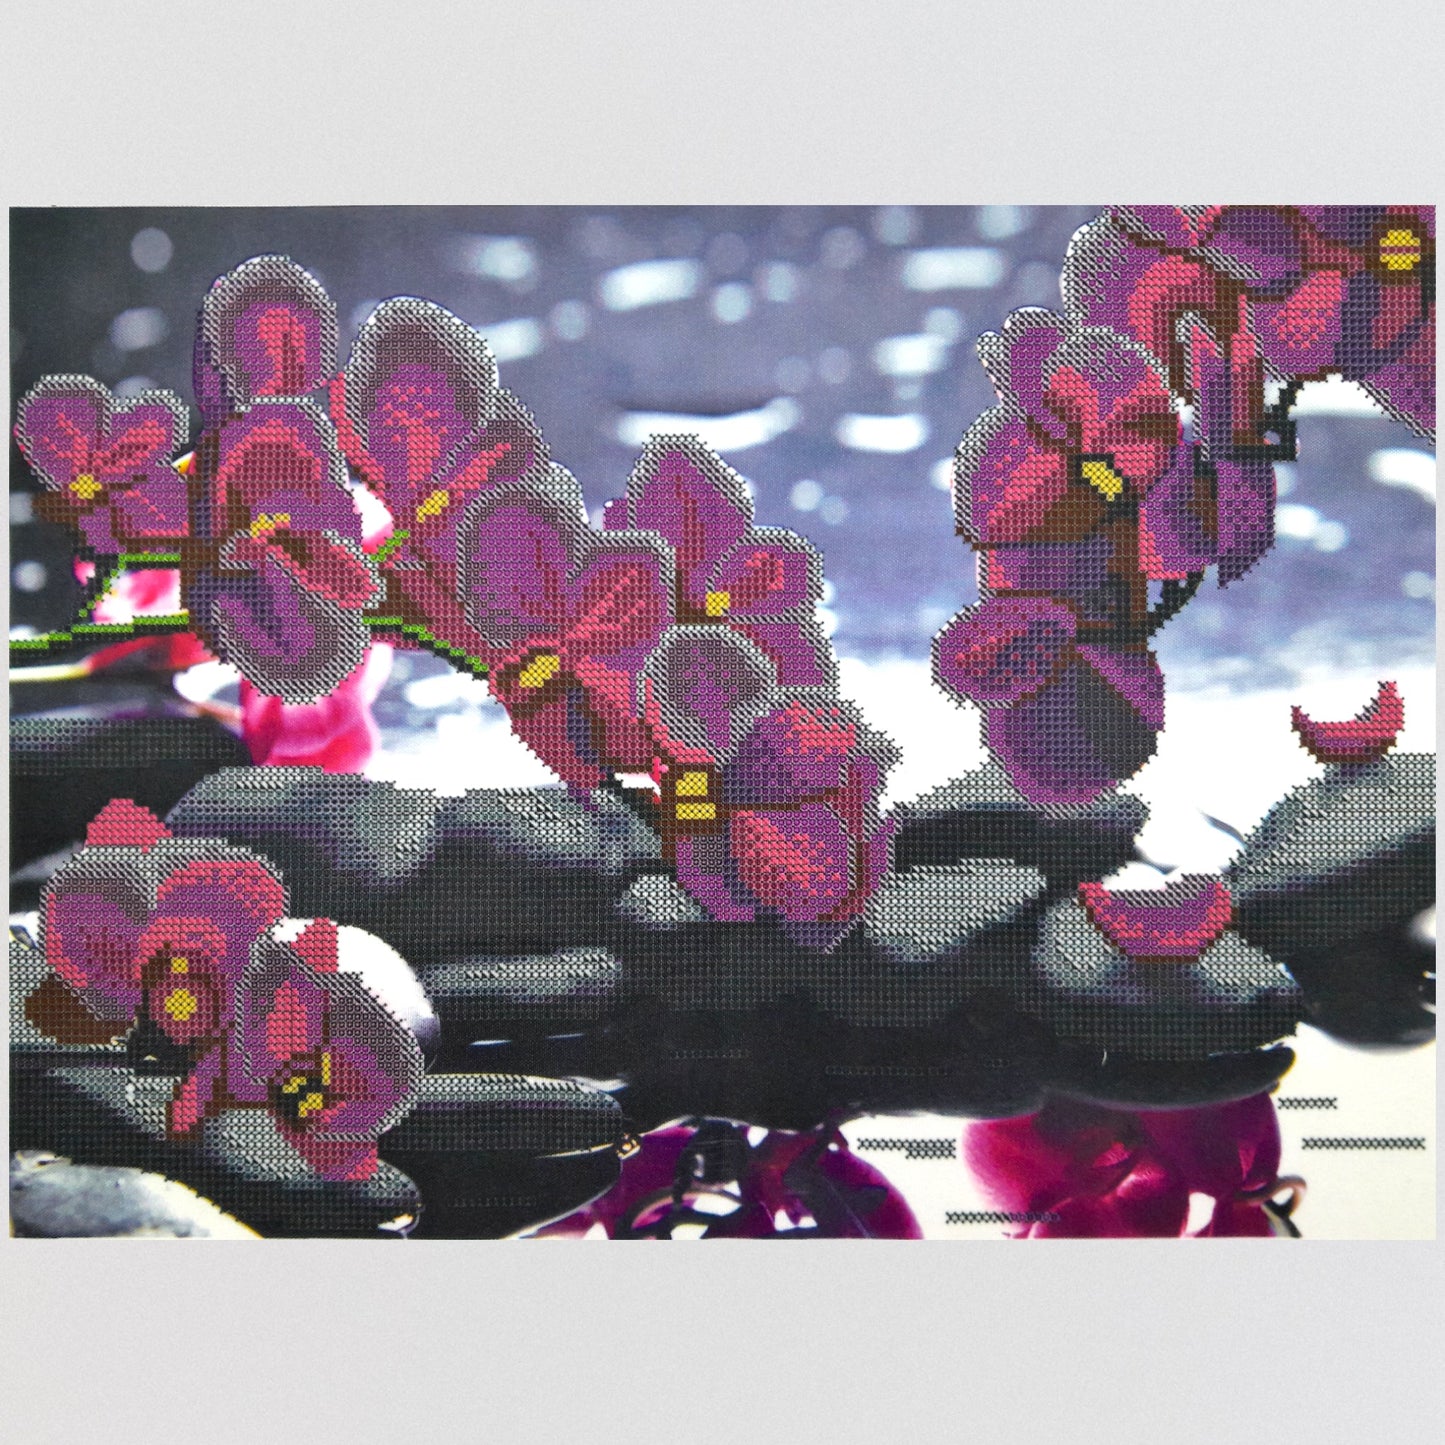 DIY Bead embroidery kit  "Orchid over water". Size: 16.5 - 11.8 in (42 - 30cm) - VadymShop